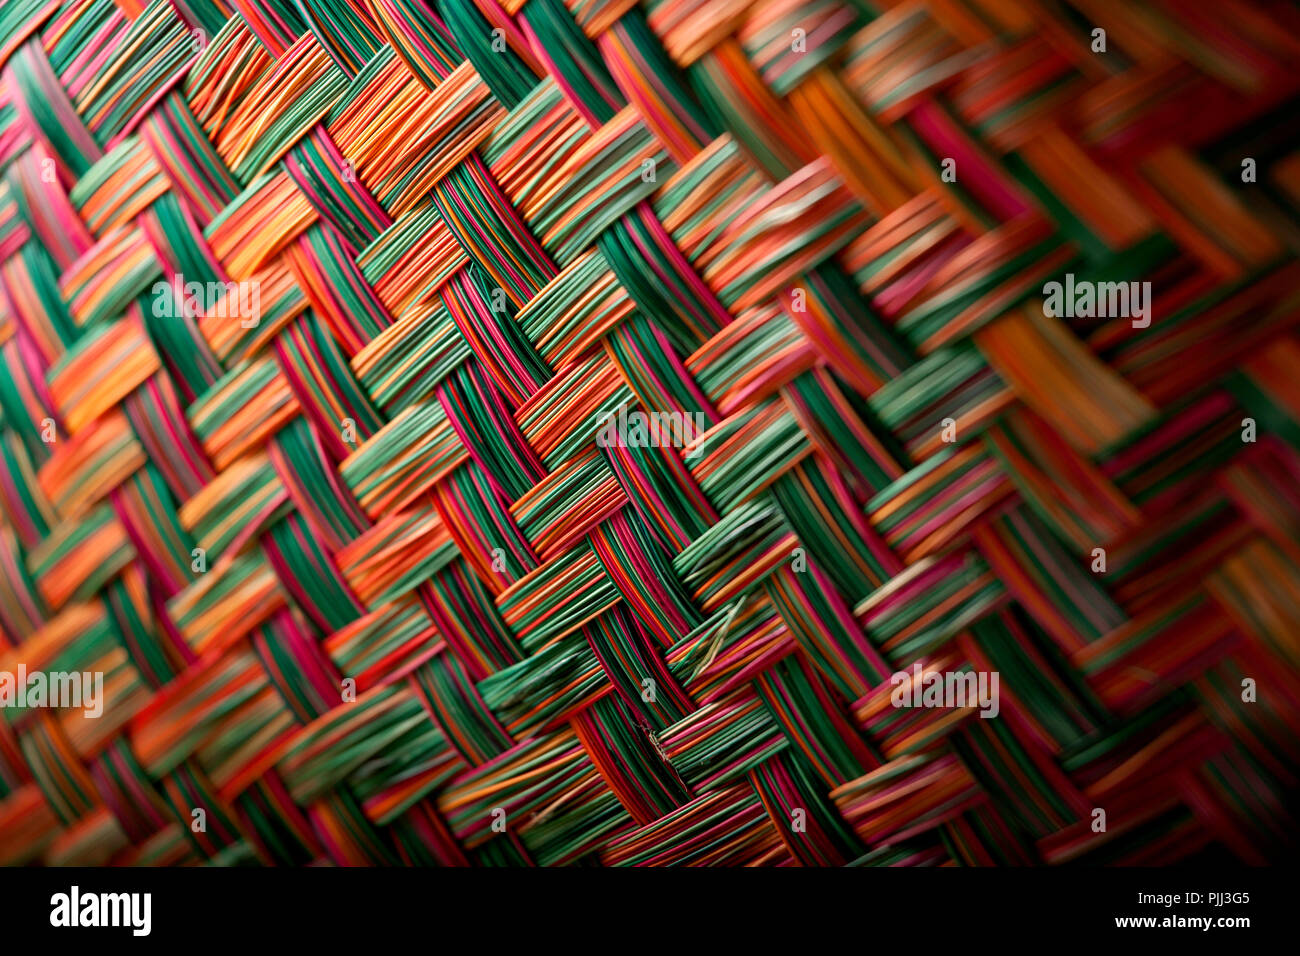 bright and colourful herring bone basket weave pattern Stock Photo